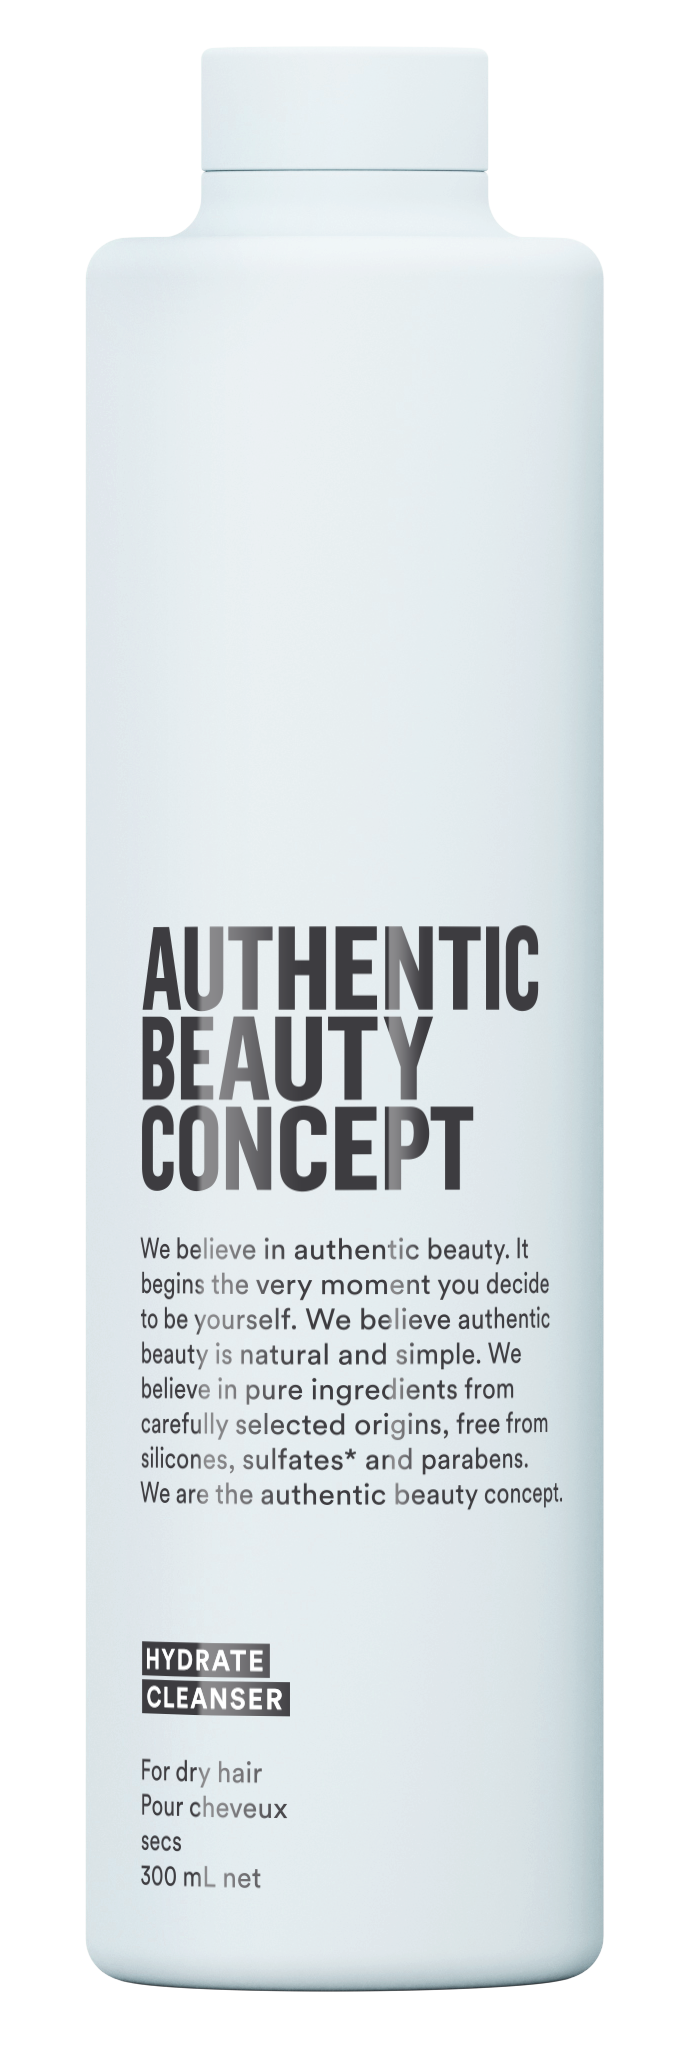 Eds Hair - Authentic Beauty Concept - Hydrate Cleanser 300ml